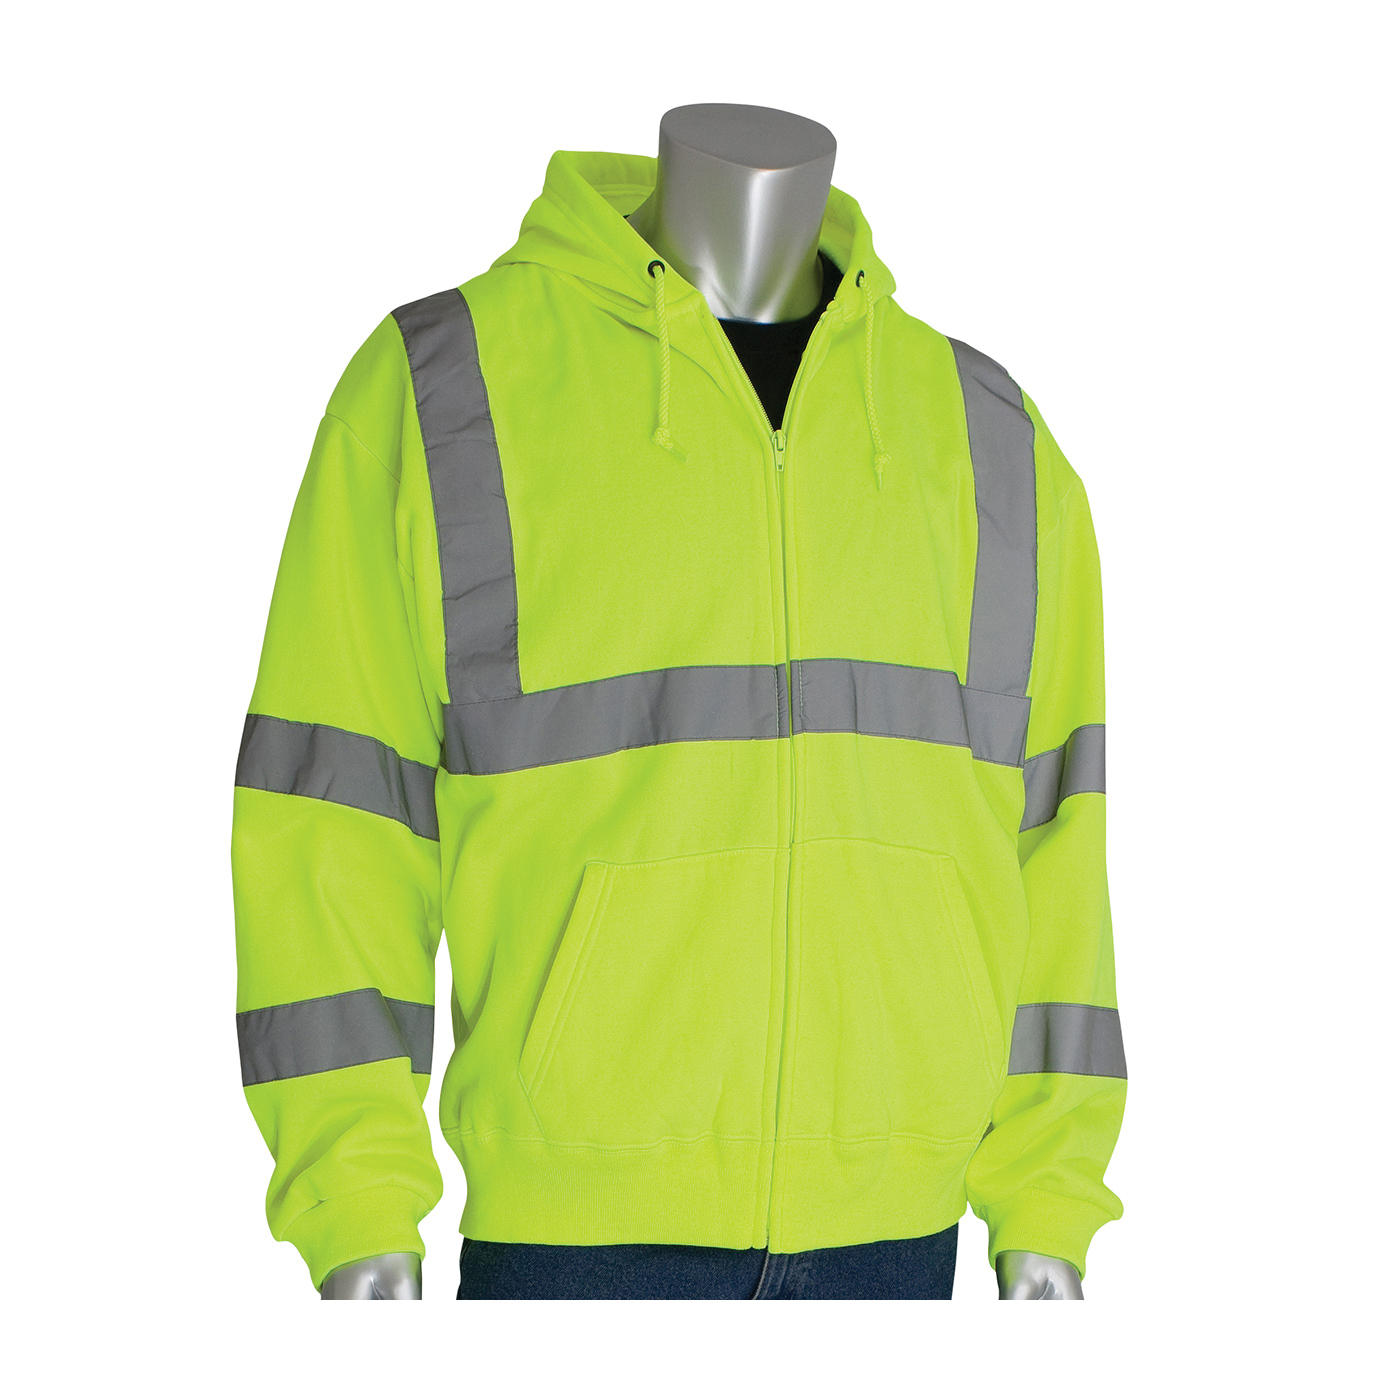 PIP® SafetyGear 323-HSSELY-2X Premium High Visibility Sweatshirt, 2XL, Yellow, Wicking Polyester, 29.1 in L